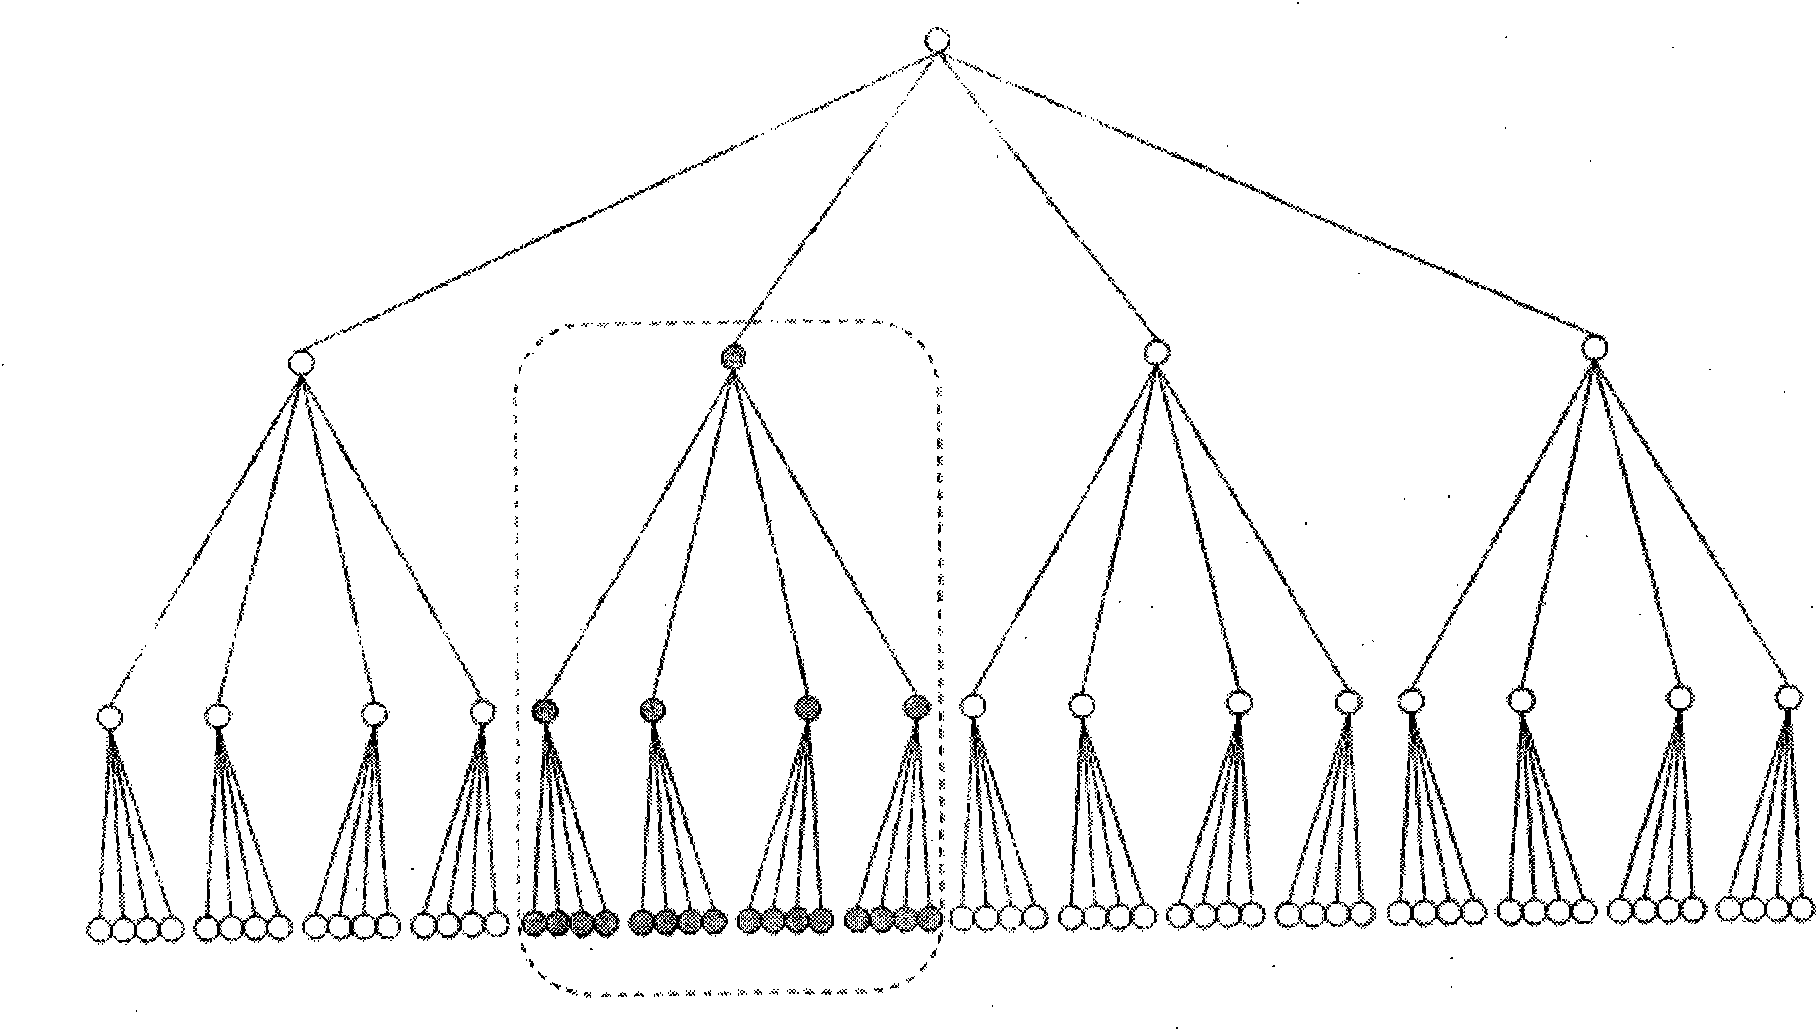 Method for realizing interconnection structure in same layer domain of tree topology